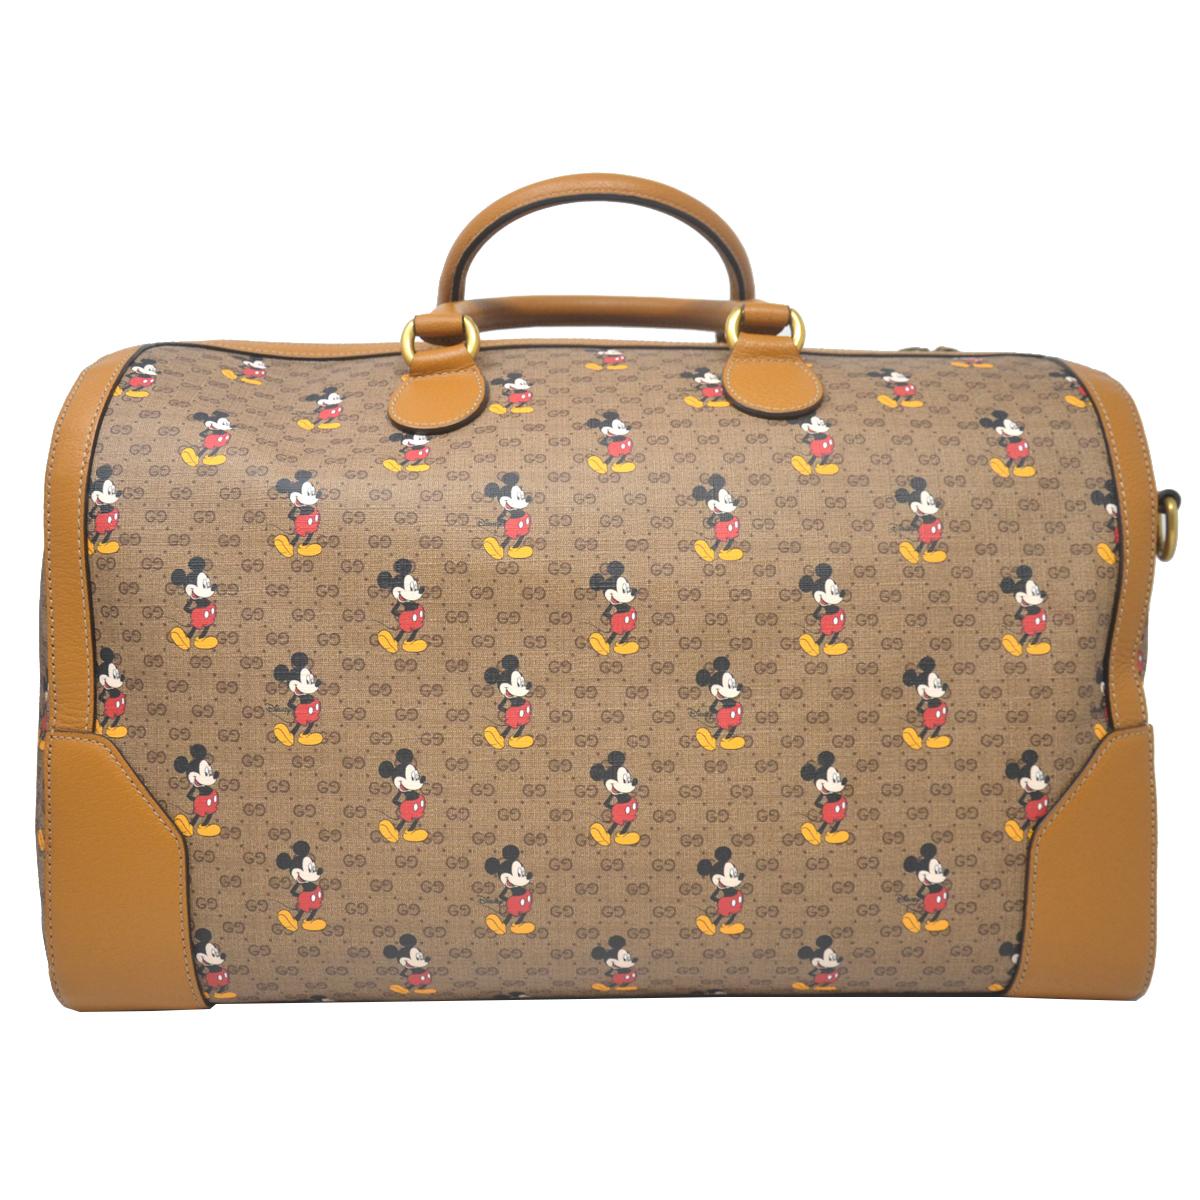 gucci mickey mouse duffle bag